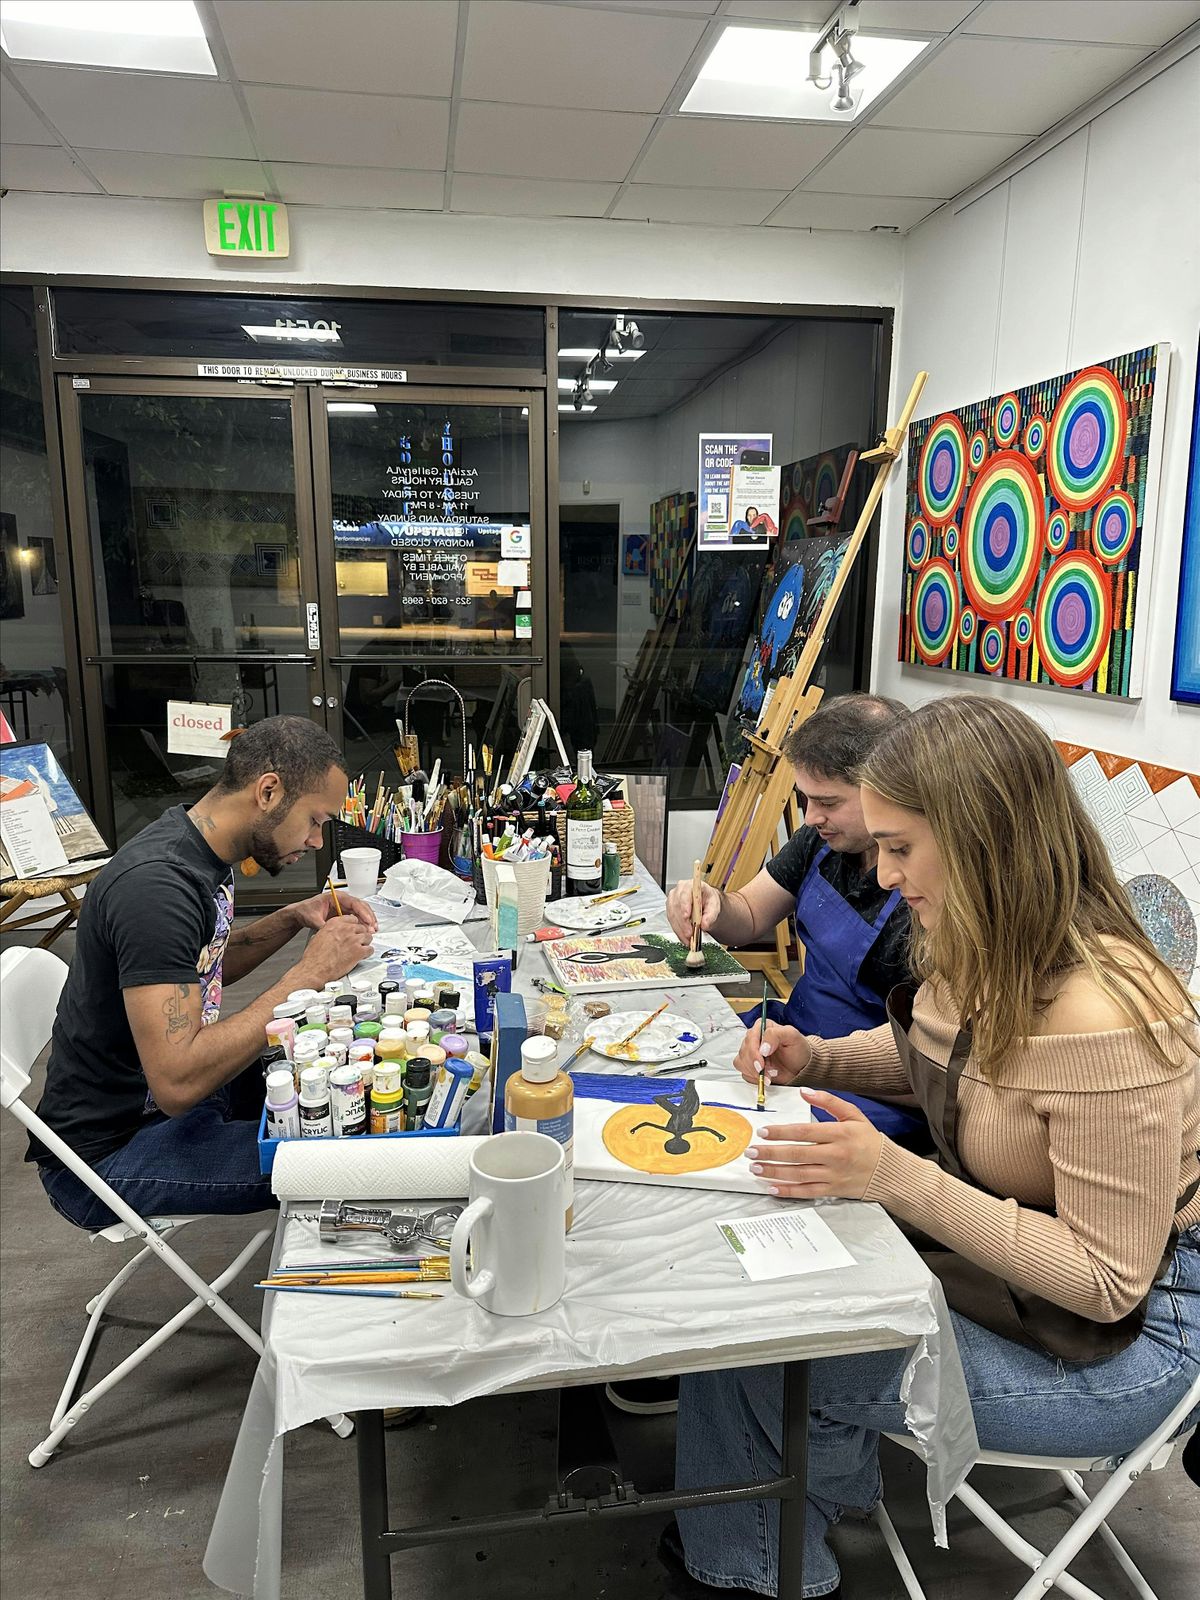 Paint and sip. Things to do in LA. Art workshop. Date ideas. Family time.